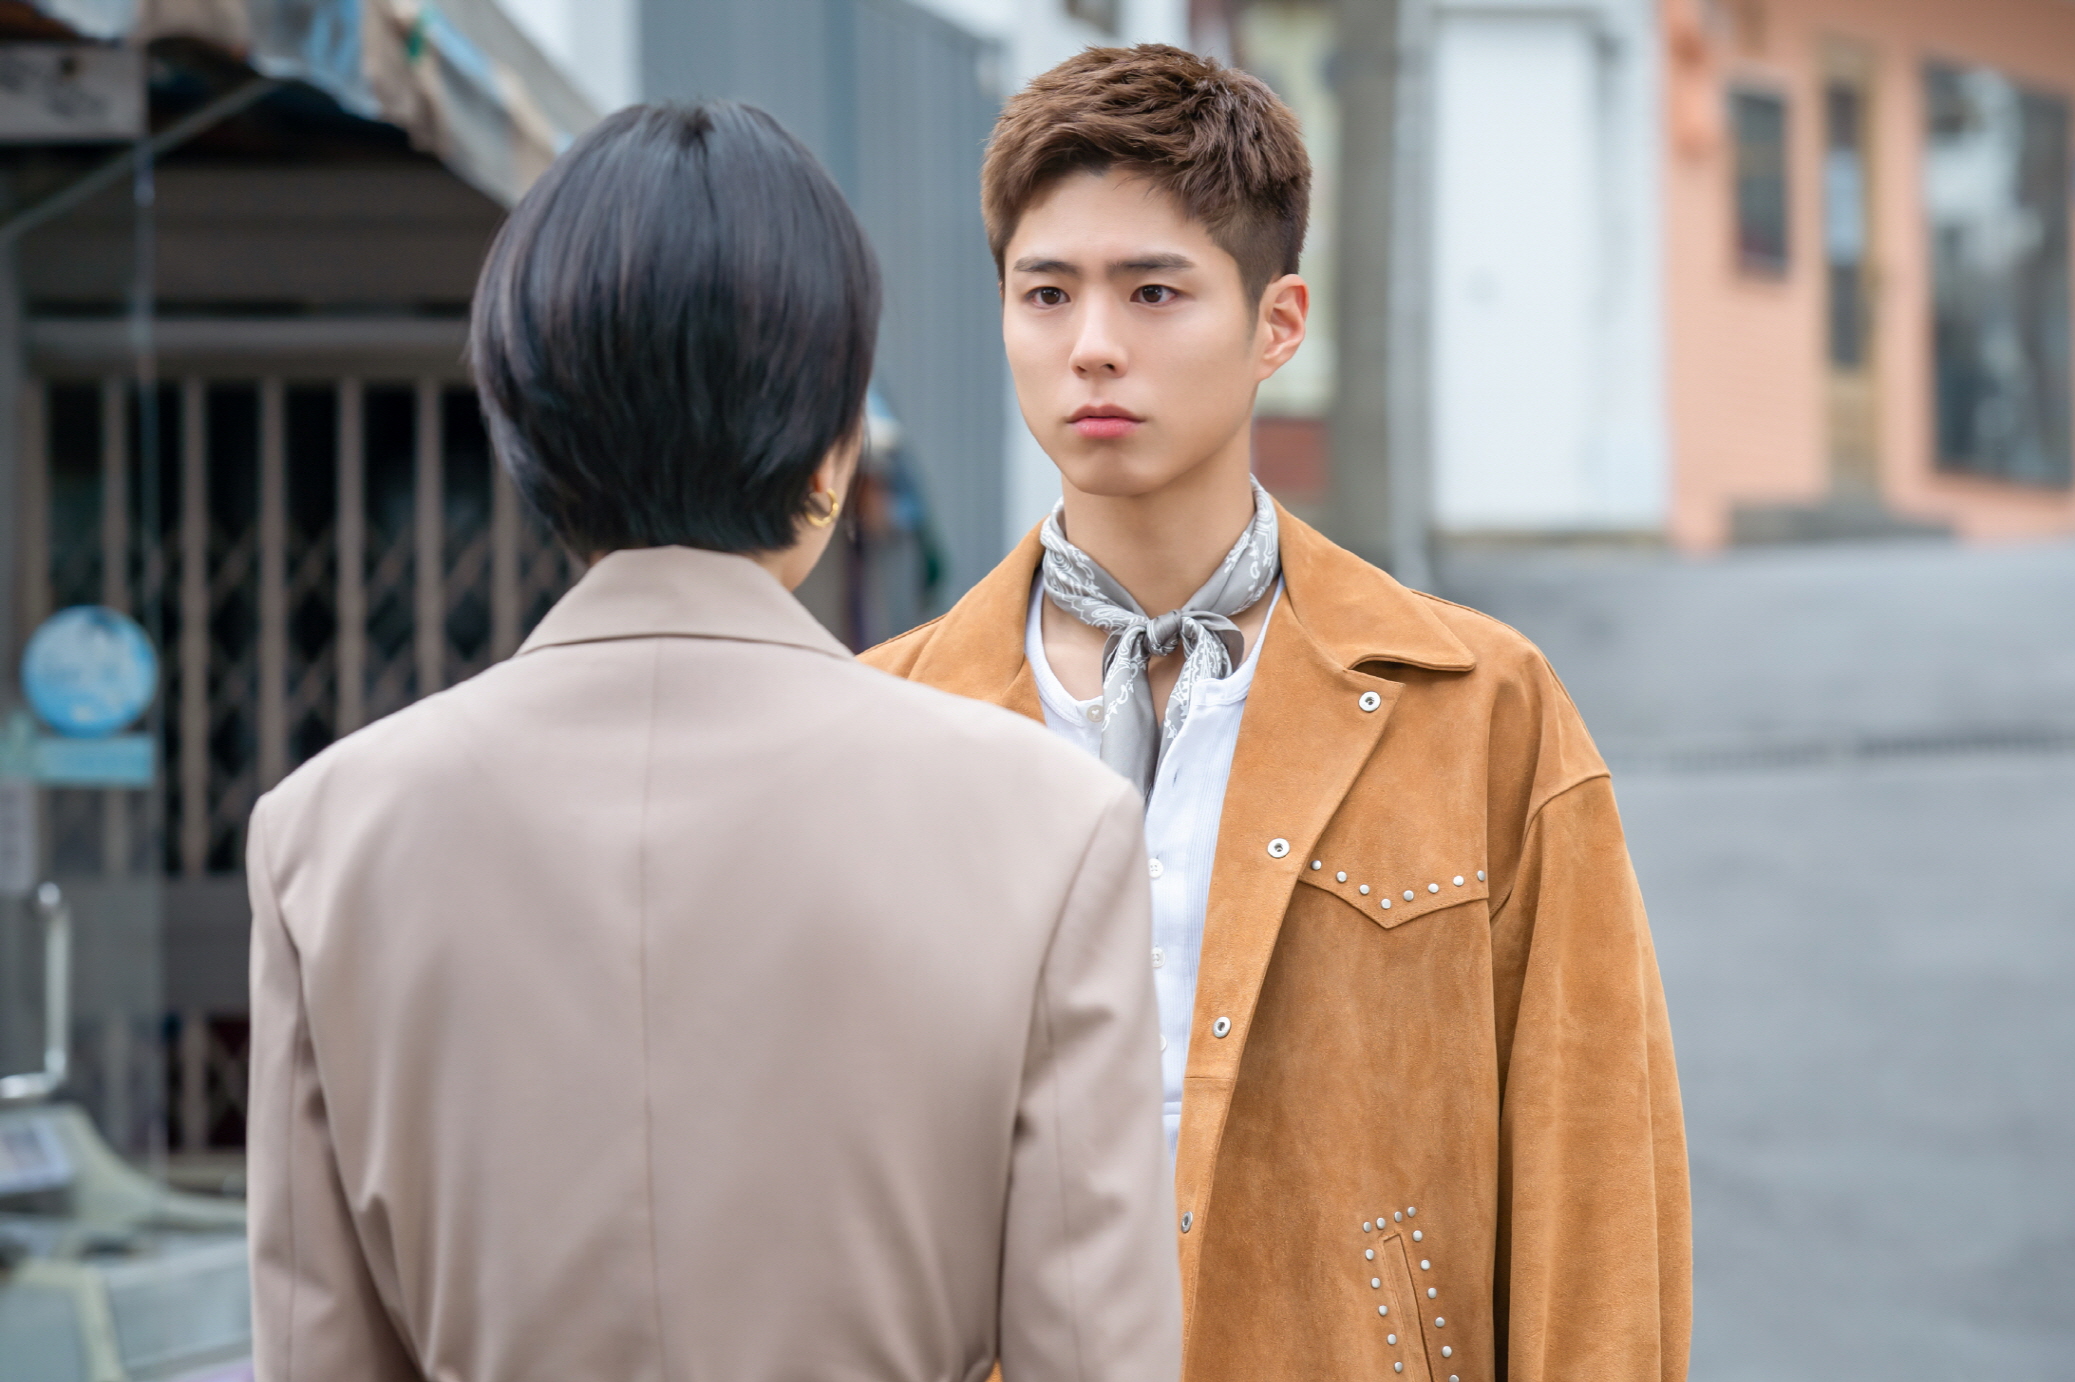 Will Park Bo-gum have a chance to keep his dream again?TVN Mon-Tue drama Record of Youth (director Ahn Gil-ho, playwright Ha Myung-hee, production fan entertainment, studio dragon) captured Lee Min-jae (Shin Dong-mi), who visited Park Bo-gum with unexpected news on the 13th.Attention is focused on the two people who decided to start a new start in different directions.In the last broadcast, a picture of a young Sa Hye-joon, who met the turning point of life between dreams and reality, was drawn. Sa Hye-joon, who fell into the movie audition, decided to face reality and fold his dream.In front of such a sahyejun, Lee Min-jae handed out a ticket to Milan. In the sudden departure of the Milan fashion show, Sahyejun once again felt living.His Choices, who gave up his dream because he was passionate about his work more than anyone else and was desperate, added sadness.The Milan fashion show also caused a big wave for the first manager Lee Min-jae, who stepped out with his arms kicked in the face of Lee Tae-soo (Lee Chang-hoon), who interfered with the future of Sa Hye-joon.Lee Min-jae, who felt the pride and joy that he had never experienced while watching Sa Hye-joon shining on the runway, raised his curiosity about his future move by finding value in what he wanted to do well with someones dreams.In the meantime, the images of Sa Hye-joon and Lee Min-jae in the public photos stimulate curiosity.I feel his firm determination to put down everything in the appearance of Sa Hye-joon, who is not shaken by any words of Lee Min-jae.Lee Min-jae, who is angry at Sa Hye-joon, who turned around without hesitation, is also interesting. It raises the question of what words have been exchanged between the two.In the third episode, which is broadcast on the 14th (Mon), another Choices moment comes to Sa Hye-joon.In Milan, Lee Min-jae told him that he was special to Sa Hye-joon, who would go to the army realistically with the news of the audition.Lee Min-jae once again finds Sa Hye-joon and gives a surprise proposal with the real reason for falling out of the movie audition.It is noteworthy whether the mind of Sa Hye-joon, who gave up his dream of Actor, will be returned and a new tomorrow will be opened together.Please watch if Sa Hye-joon, who faces reality, will try to challenge his dream again, said the production team of Record of Youth.On the other hand, the third episode of tvN Mon-Tue drama Record of Youth will be broadcast at 9 pm on the 14th (Mon).iMBC  Photo Provision tvN